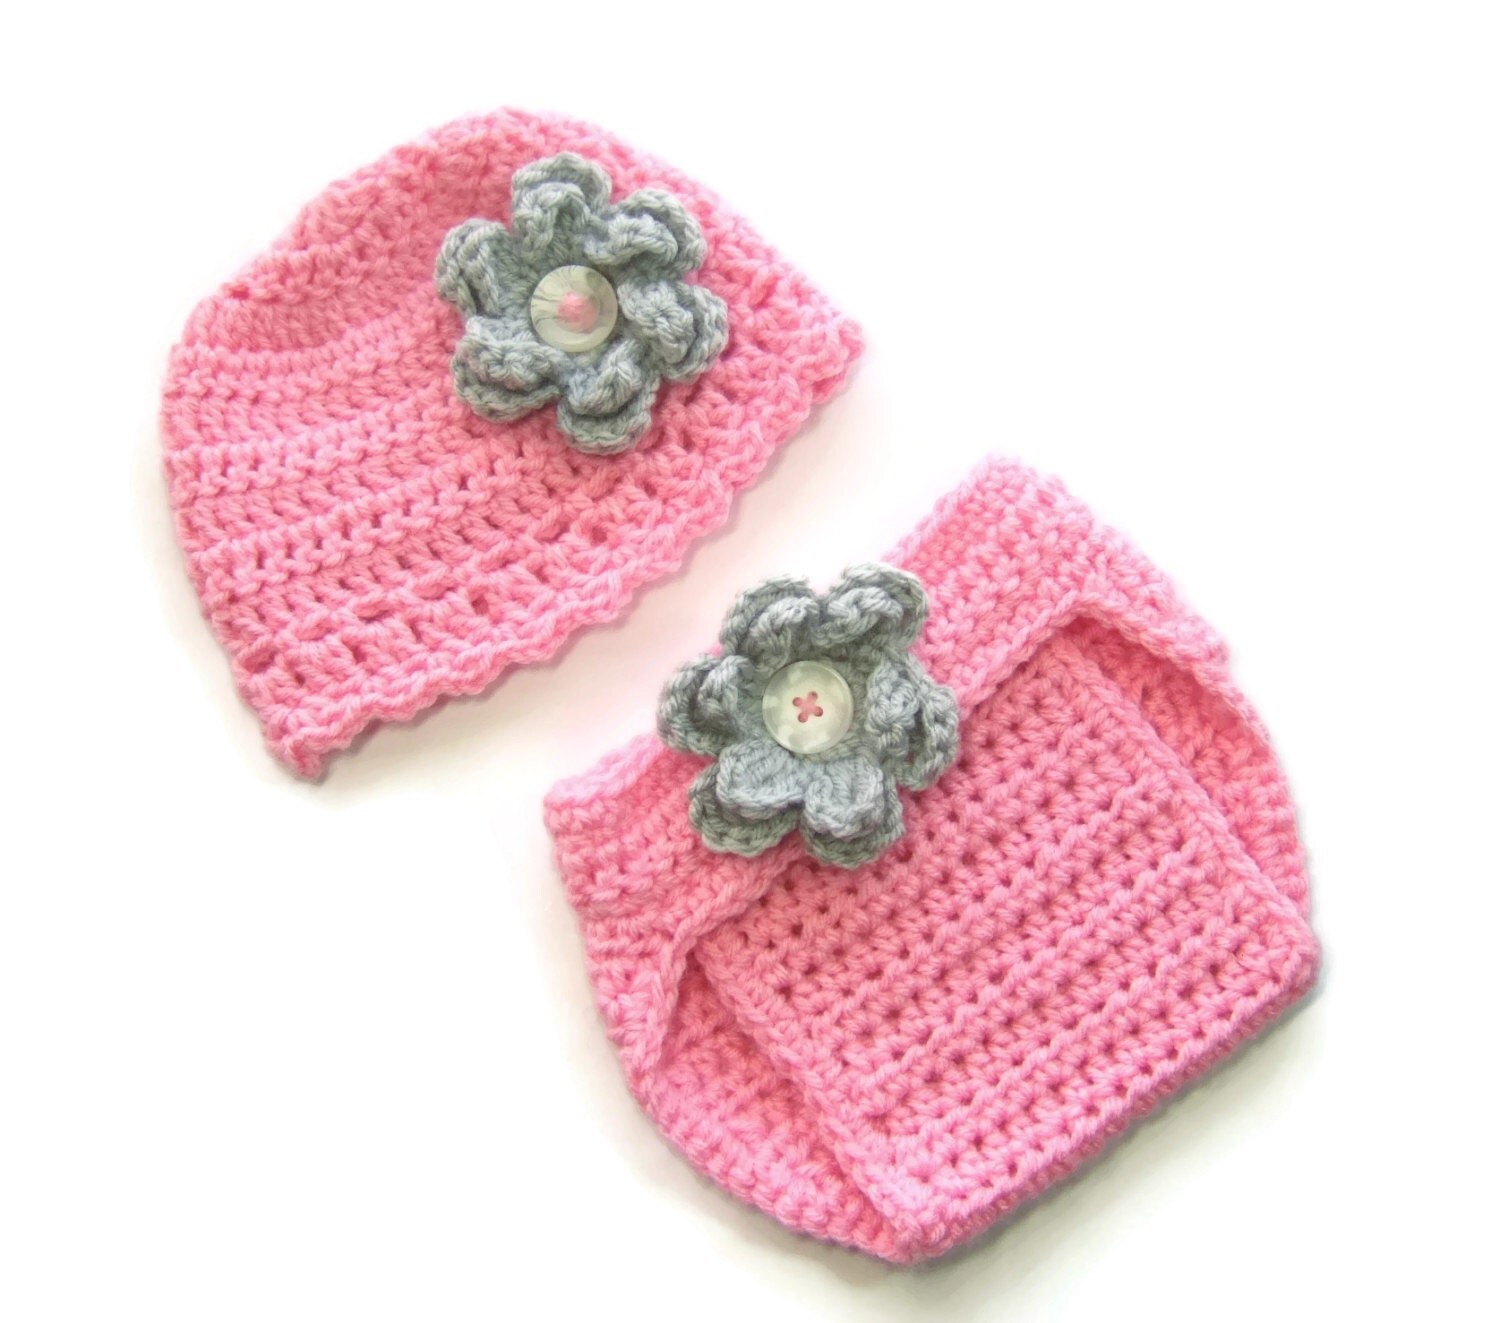 Crochet Baby Hat and Diaper Cover Set/Newborn to 3 month